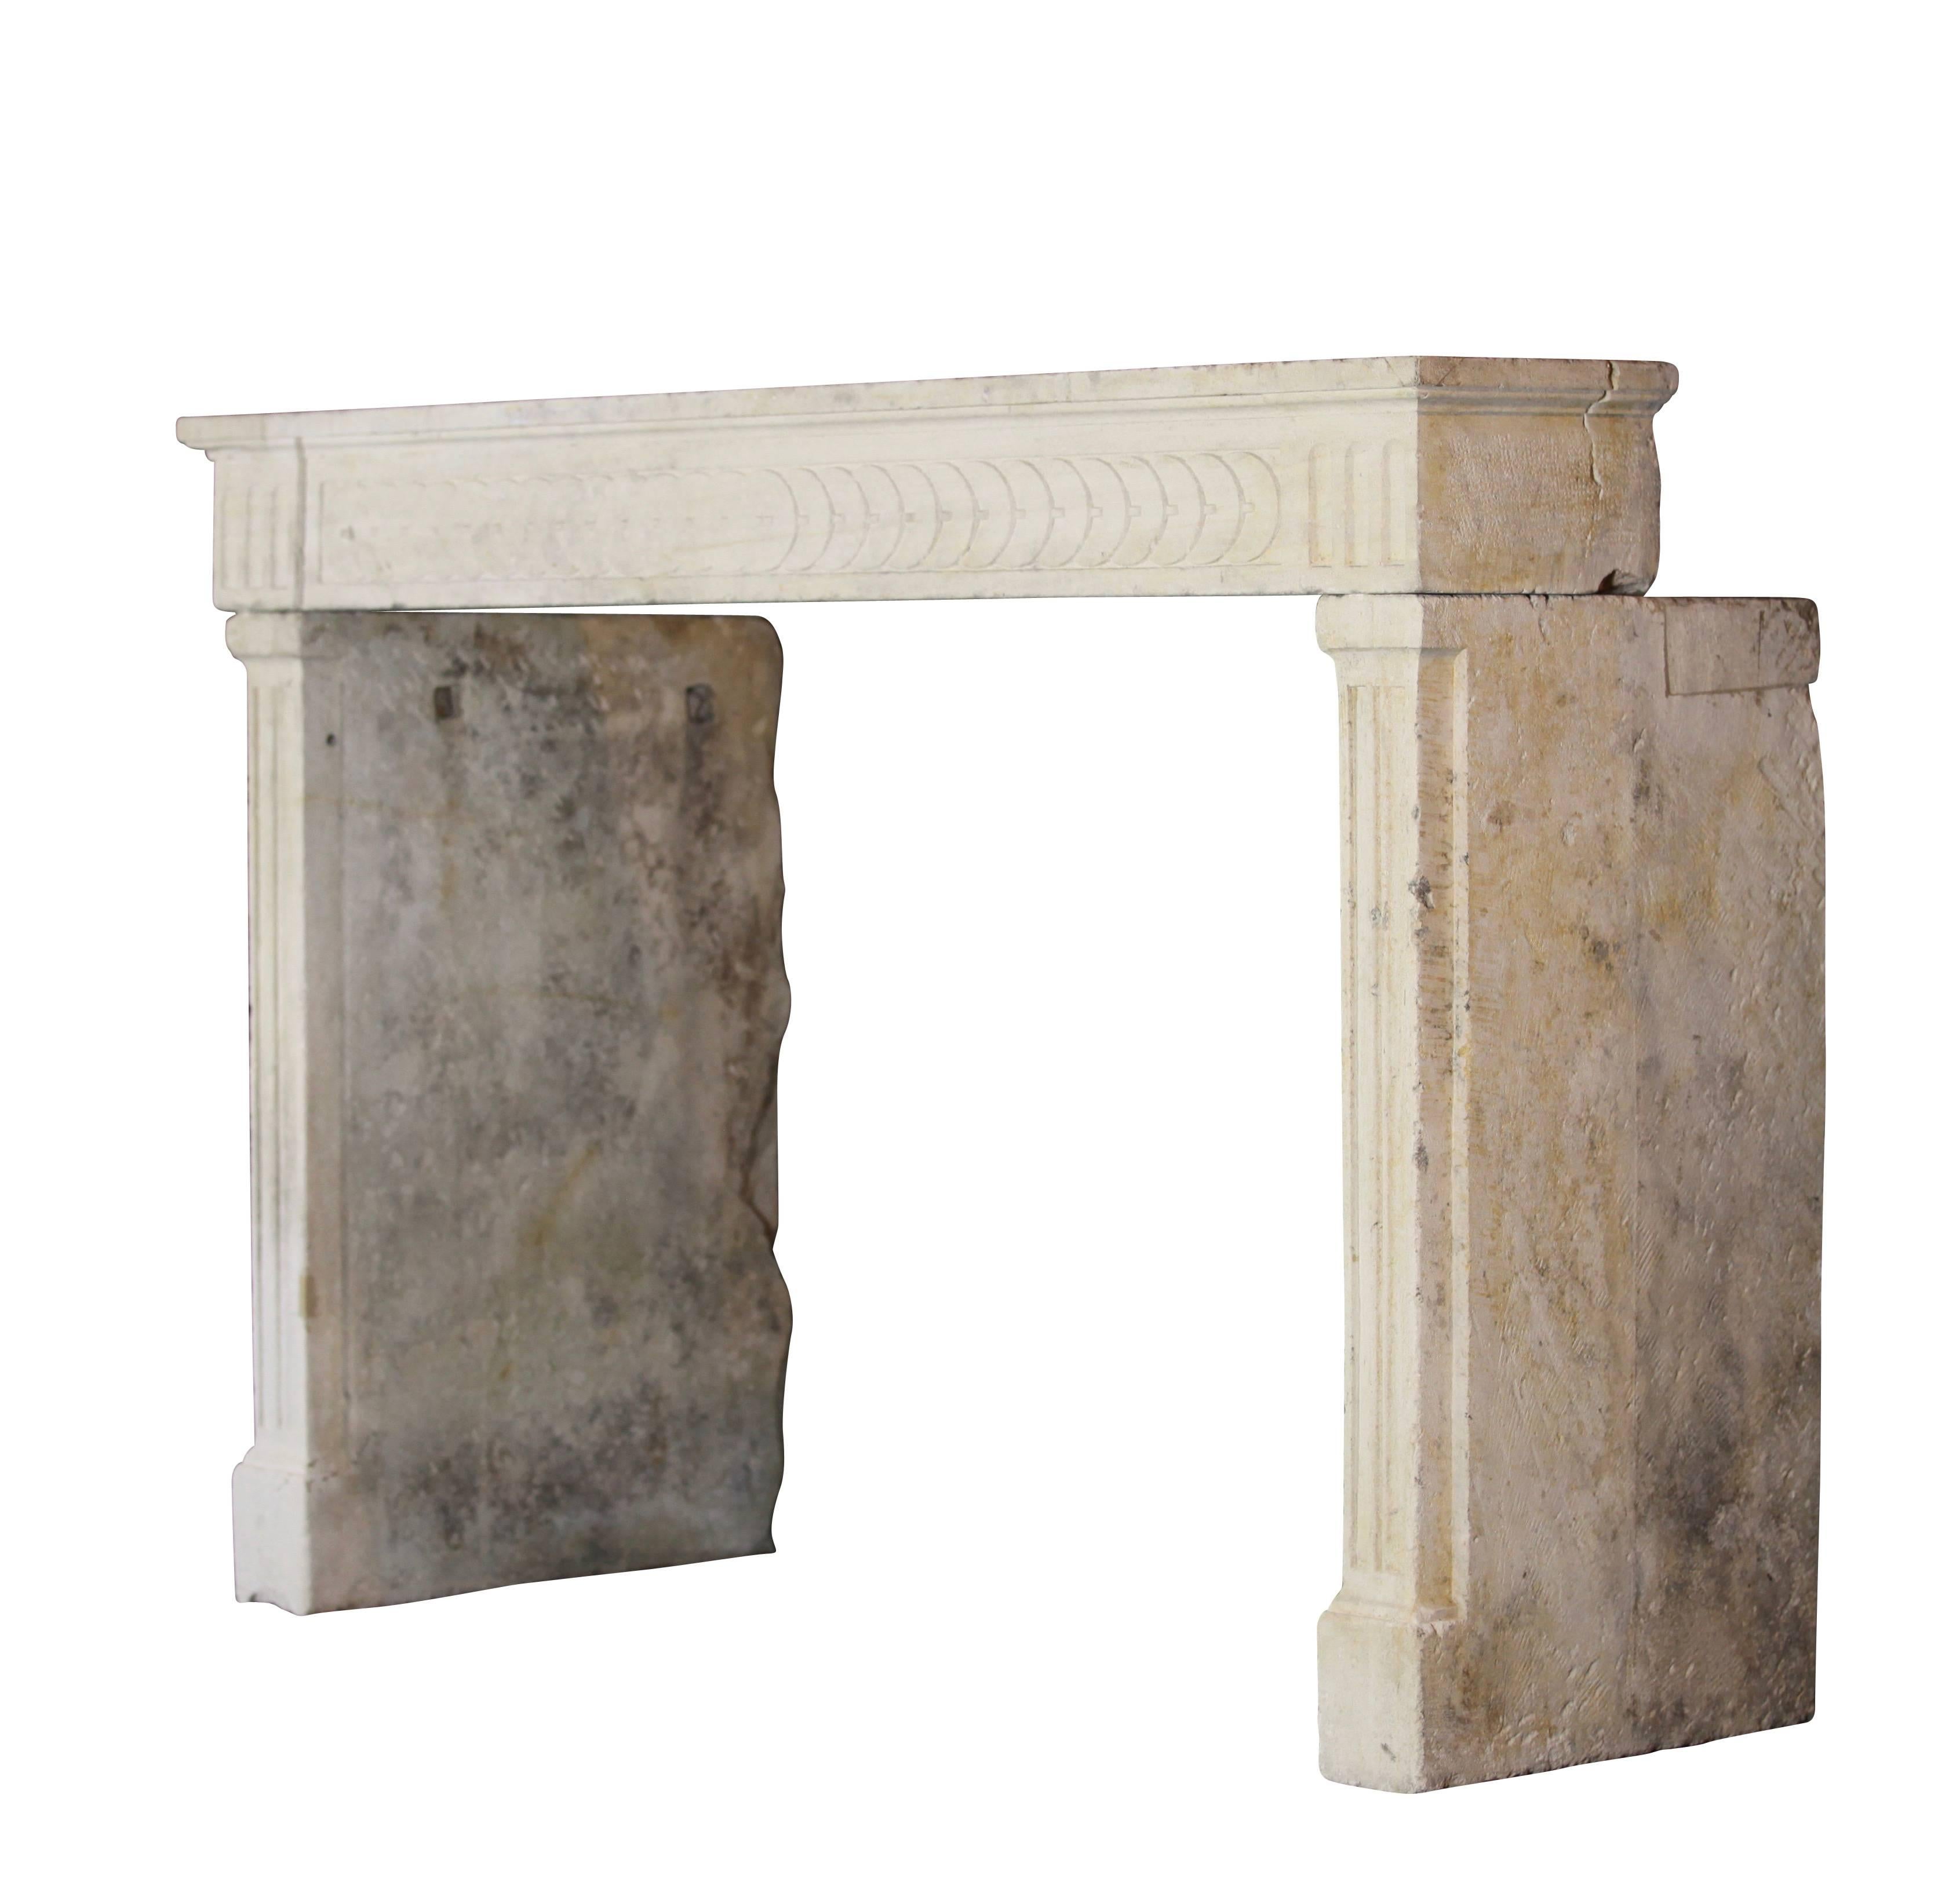 This is a very unusual limestone antique fireplace surround. The design on the front is very beautiful. The two corners on the shelf had restoration. Rustic and country but still very stylish.

Measures:
157 cm EW 61.81